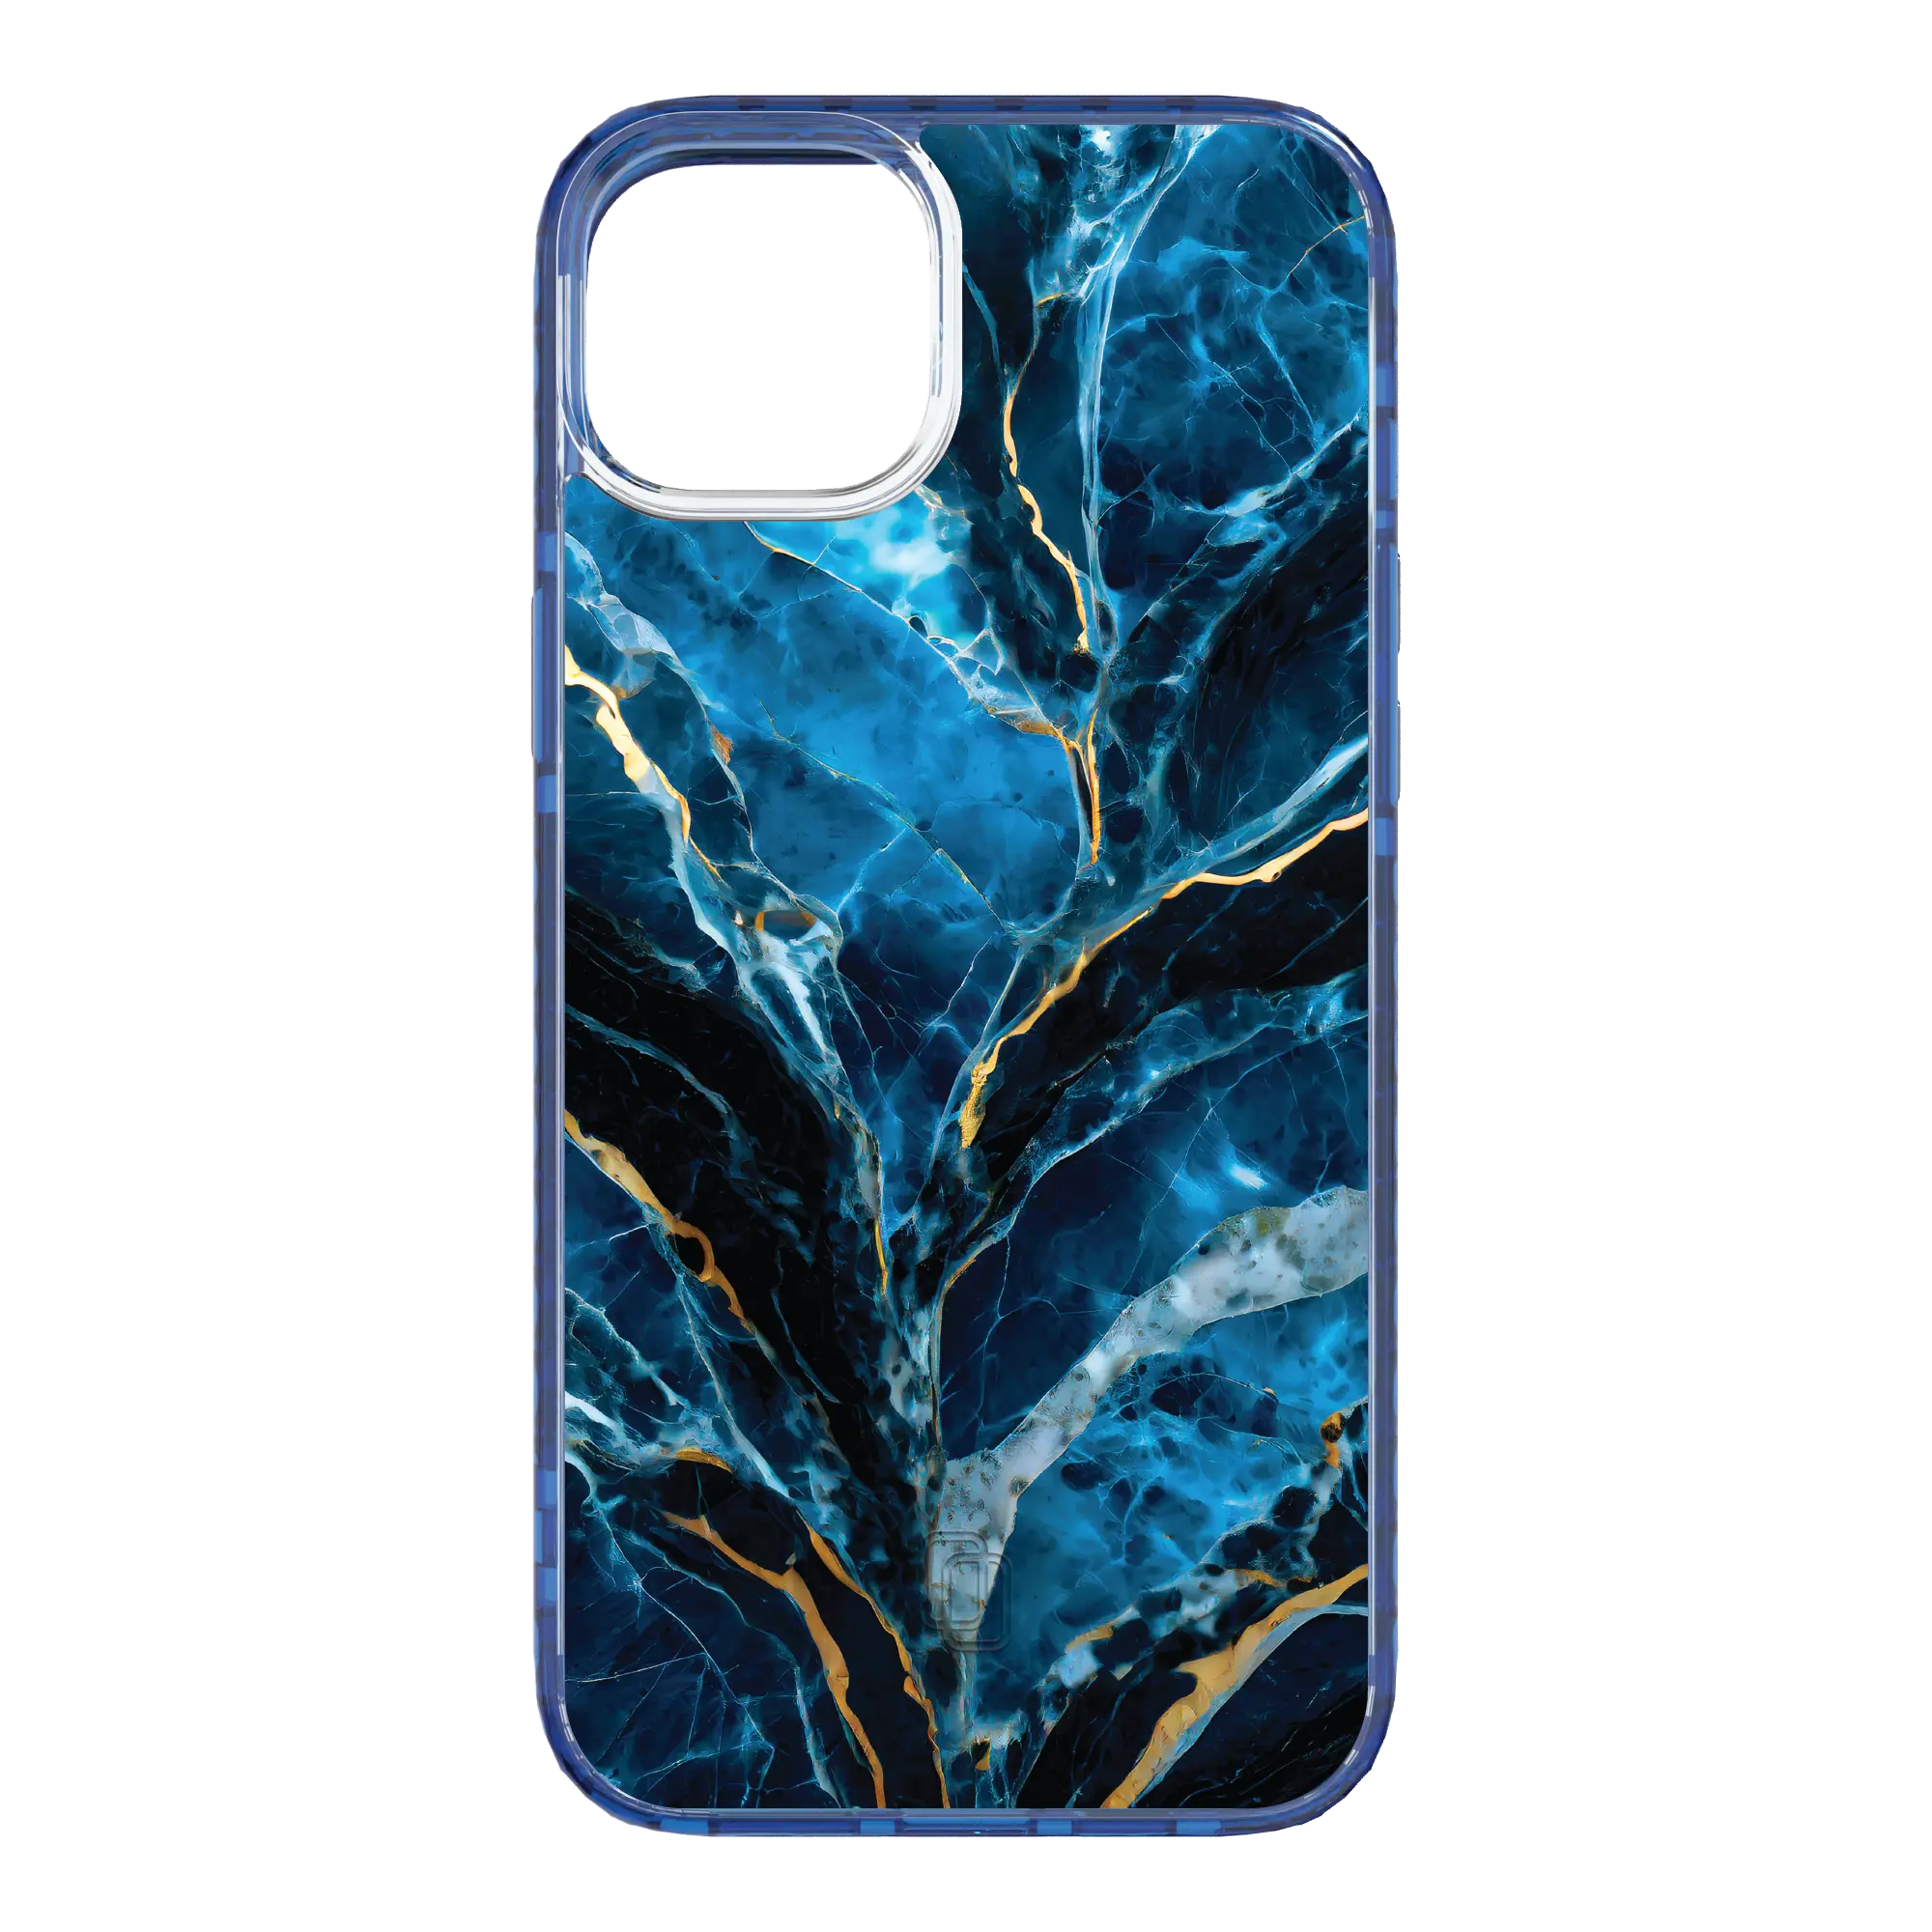 Apple-iPhone-15-Plus-Bermuda-Blue Deep Sea | Protective MagSafe Case | Marble Stone Series for Apple iPhone 15 Series cellhelmet cellhelmet